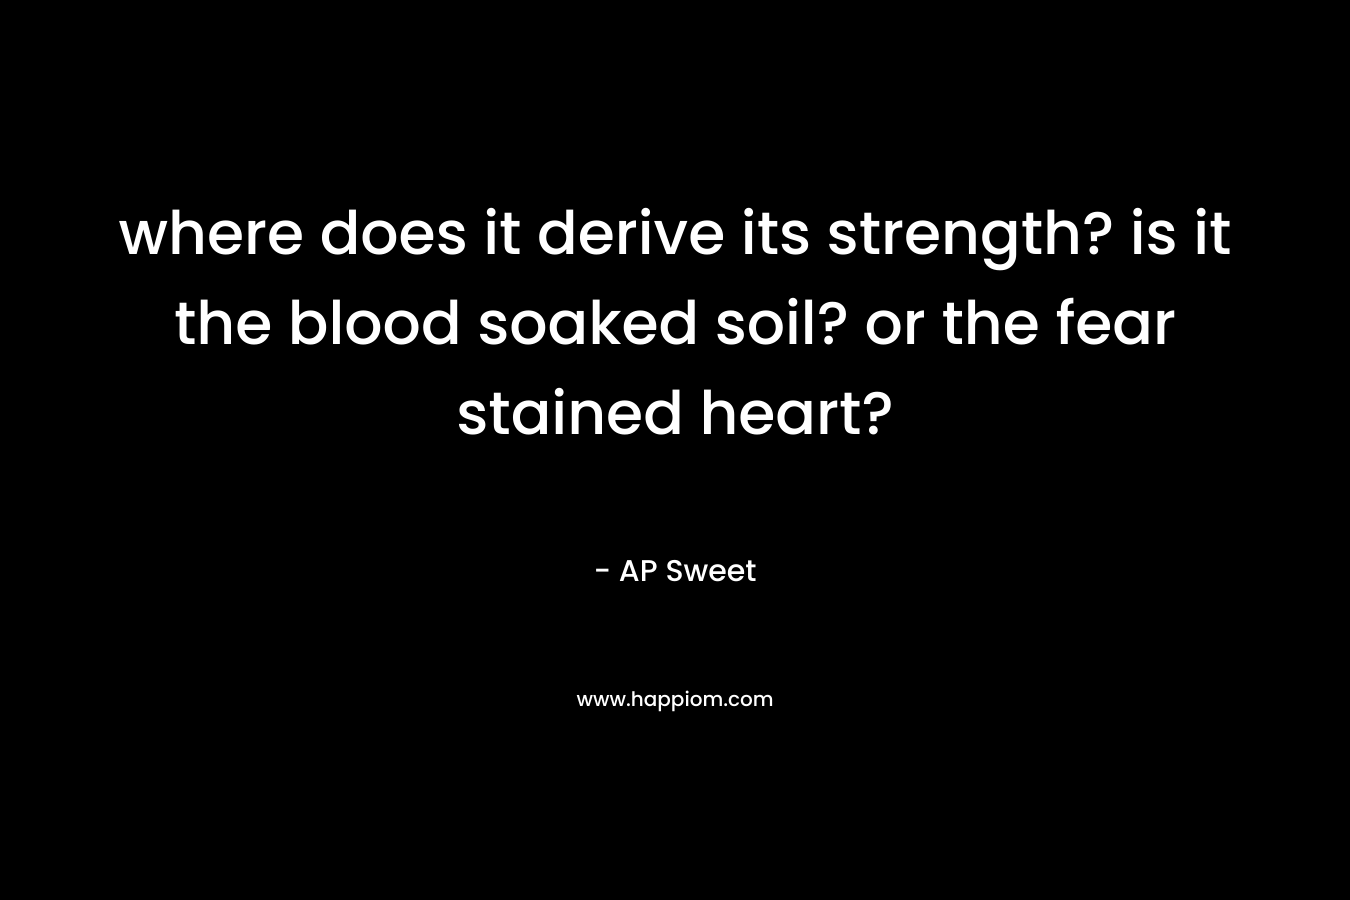 where does it derive its strength? is it the blood soaked soil? or the fear stained heart?